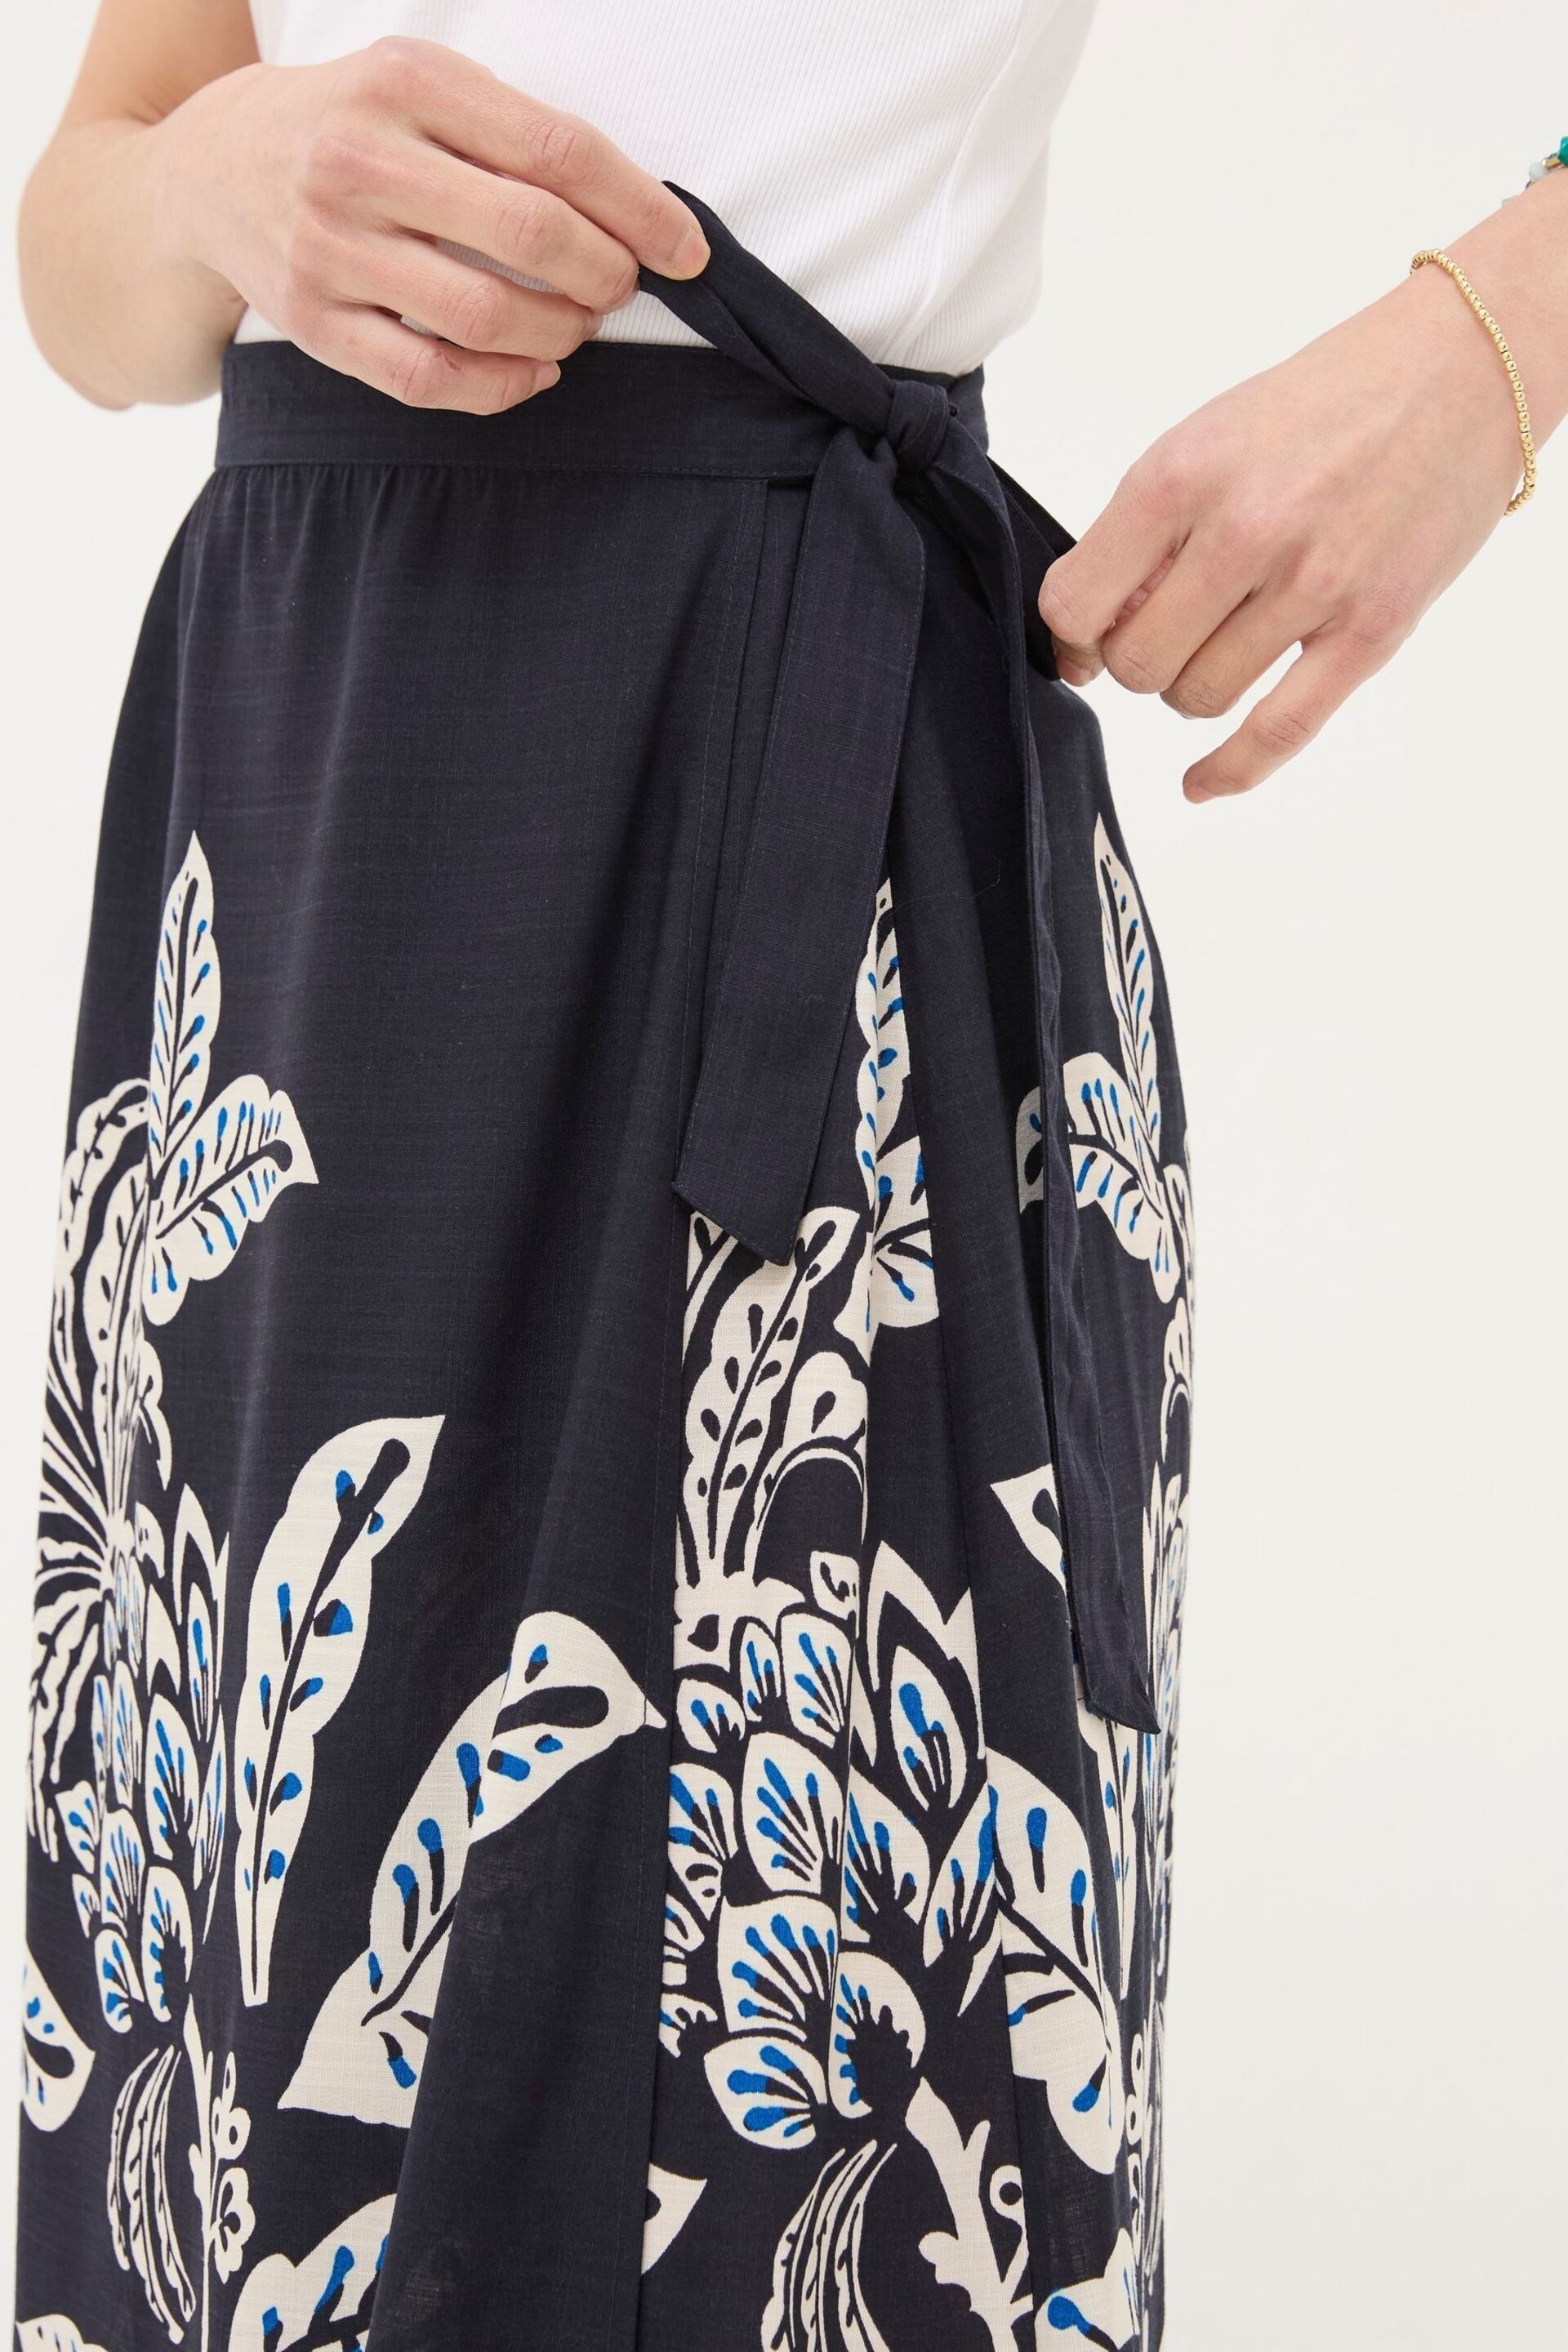 FatFace Blue Blakely Damask Placement Midi Skirt - Image 4 of 5